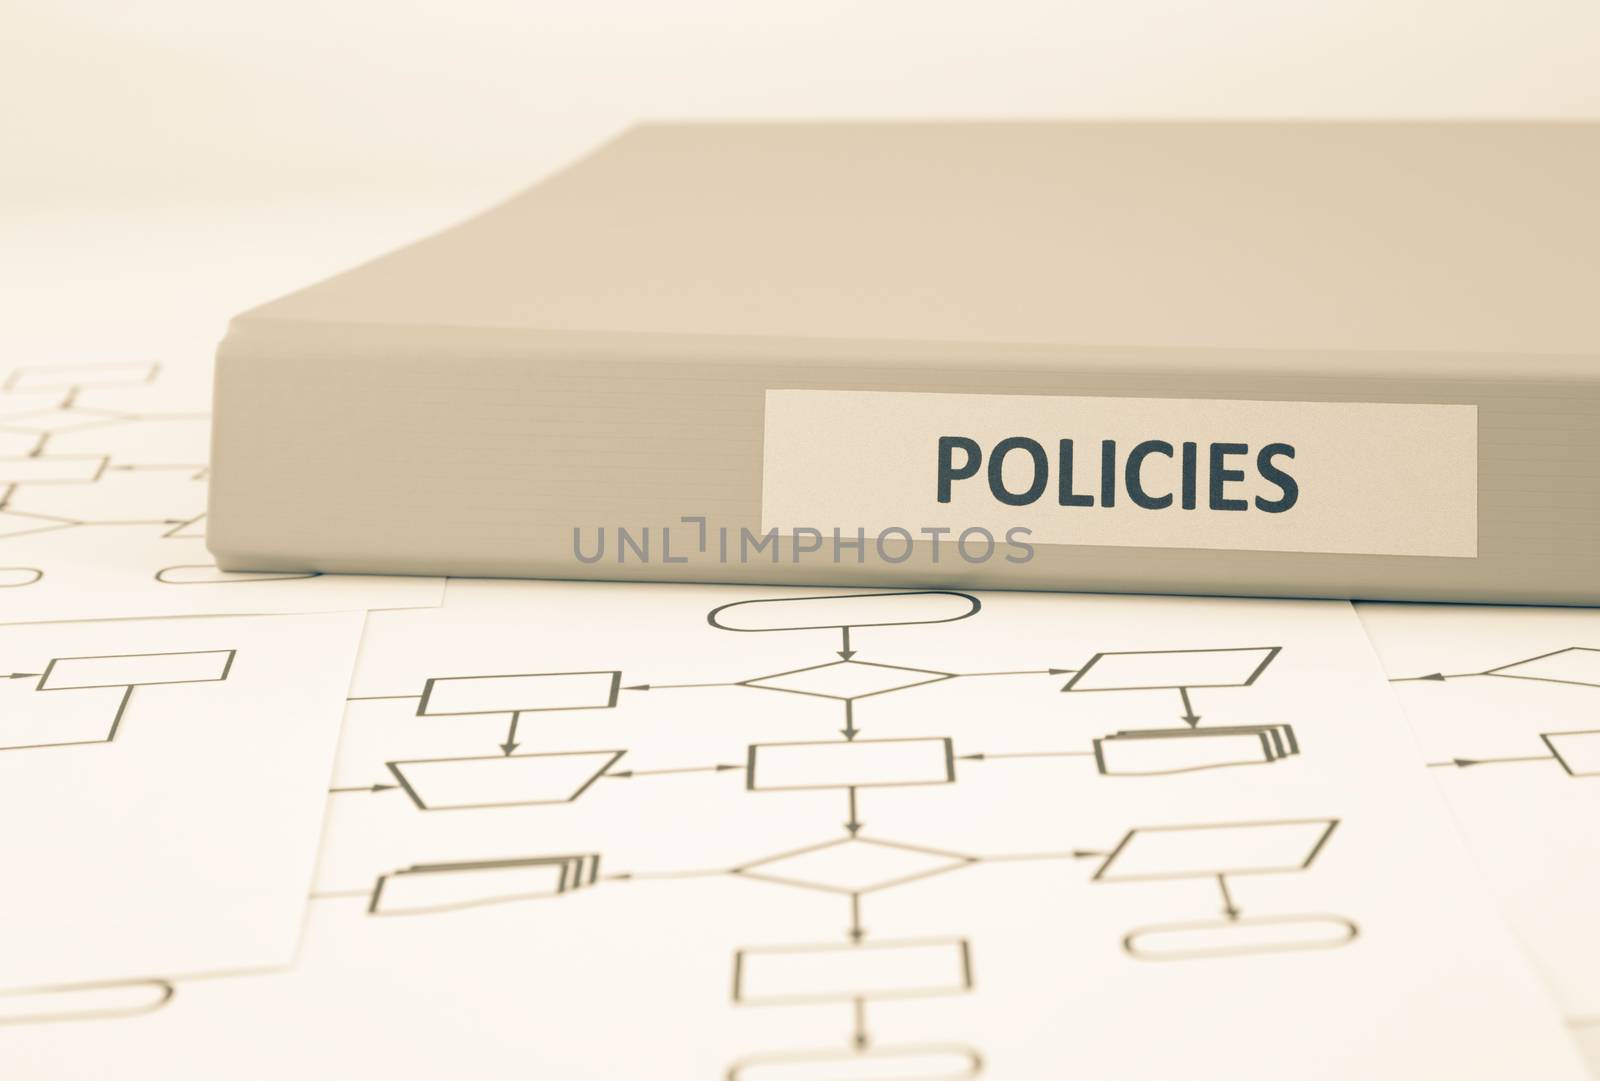 Business policies and procedures, sepia tone by vinnstock